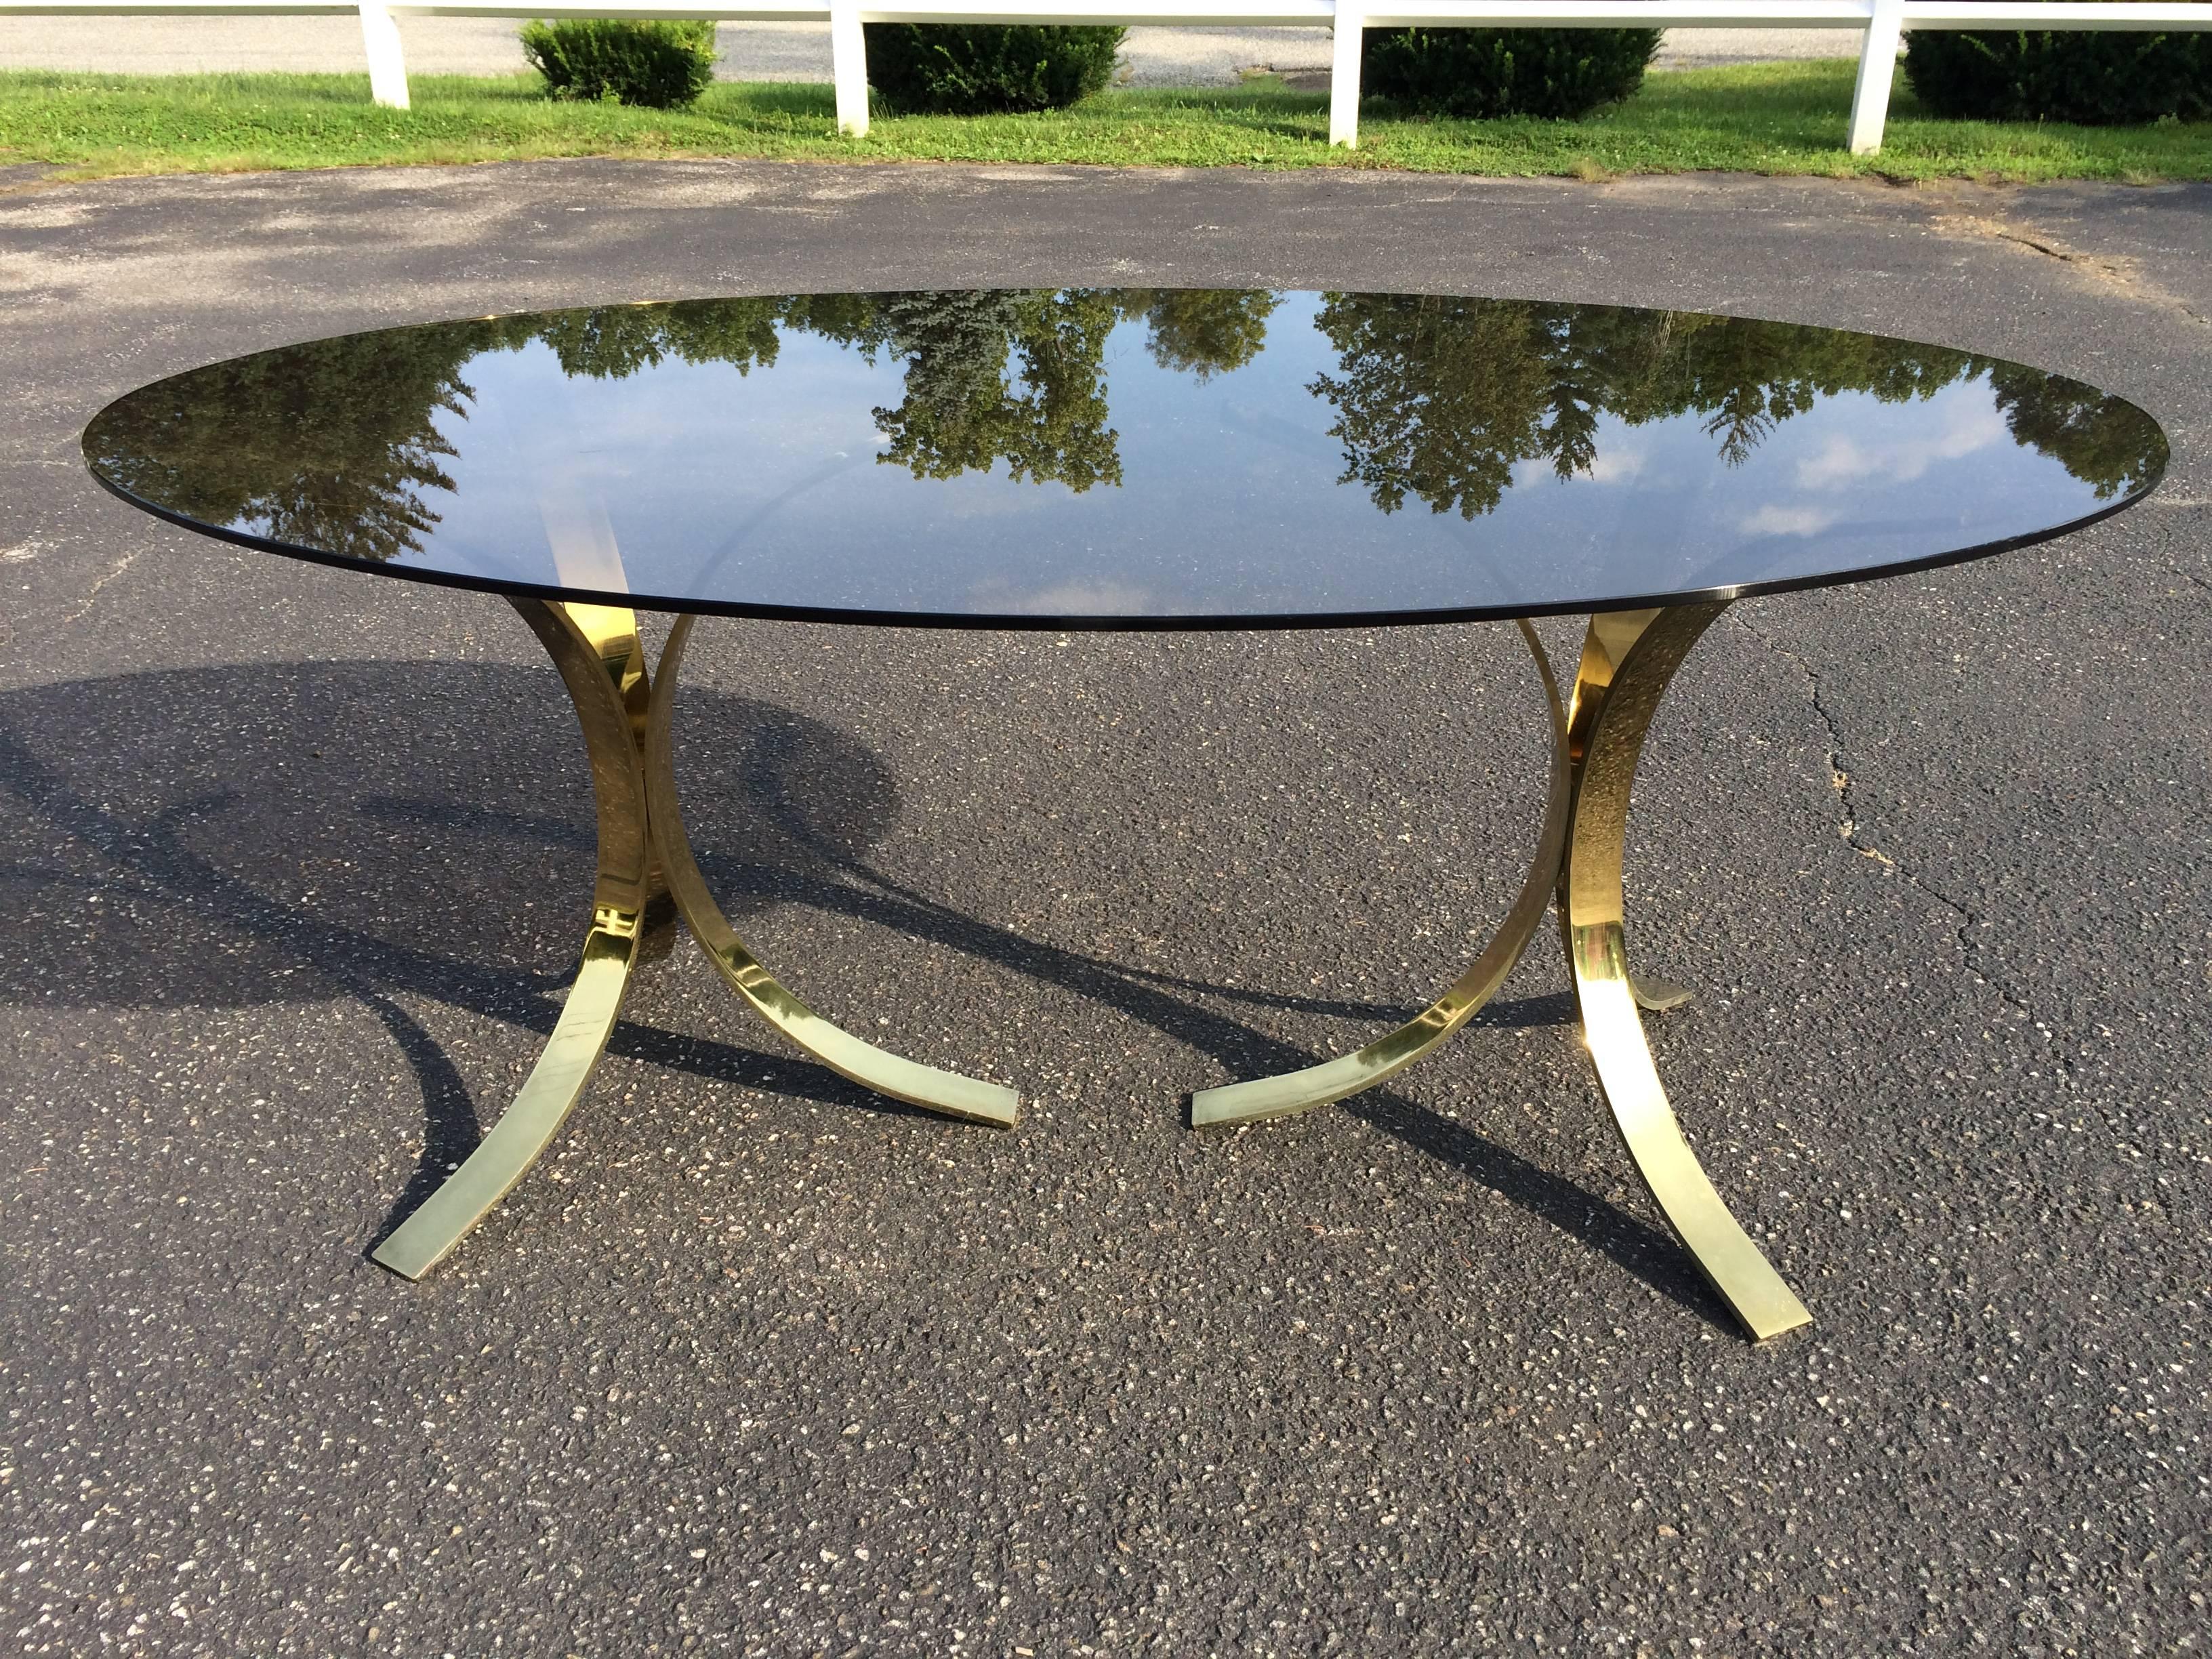 Roger Sprunger Brass and Smoked Glass Oval Dining Table. The glass is separate from the two heavy , solid brass double pedestal bases. It could possibly be a Mastercraft piece as well. No signature found.  Very elegant and sleek. Scratches to brass